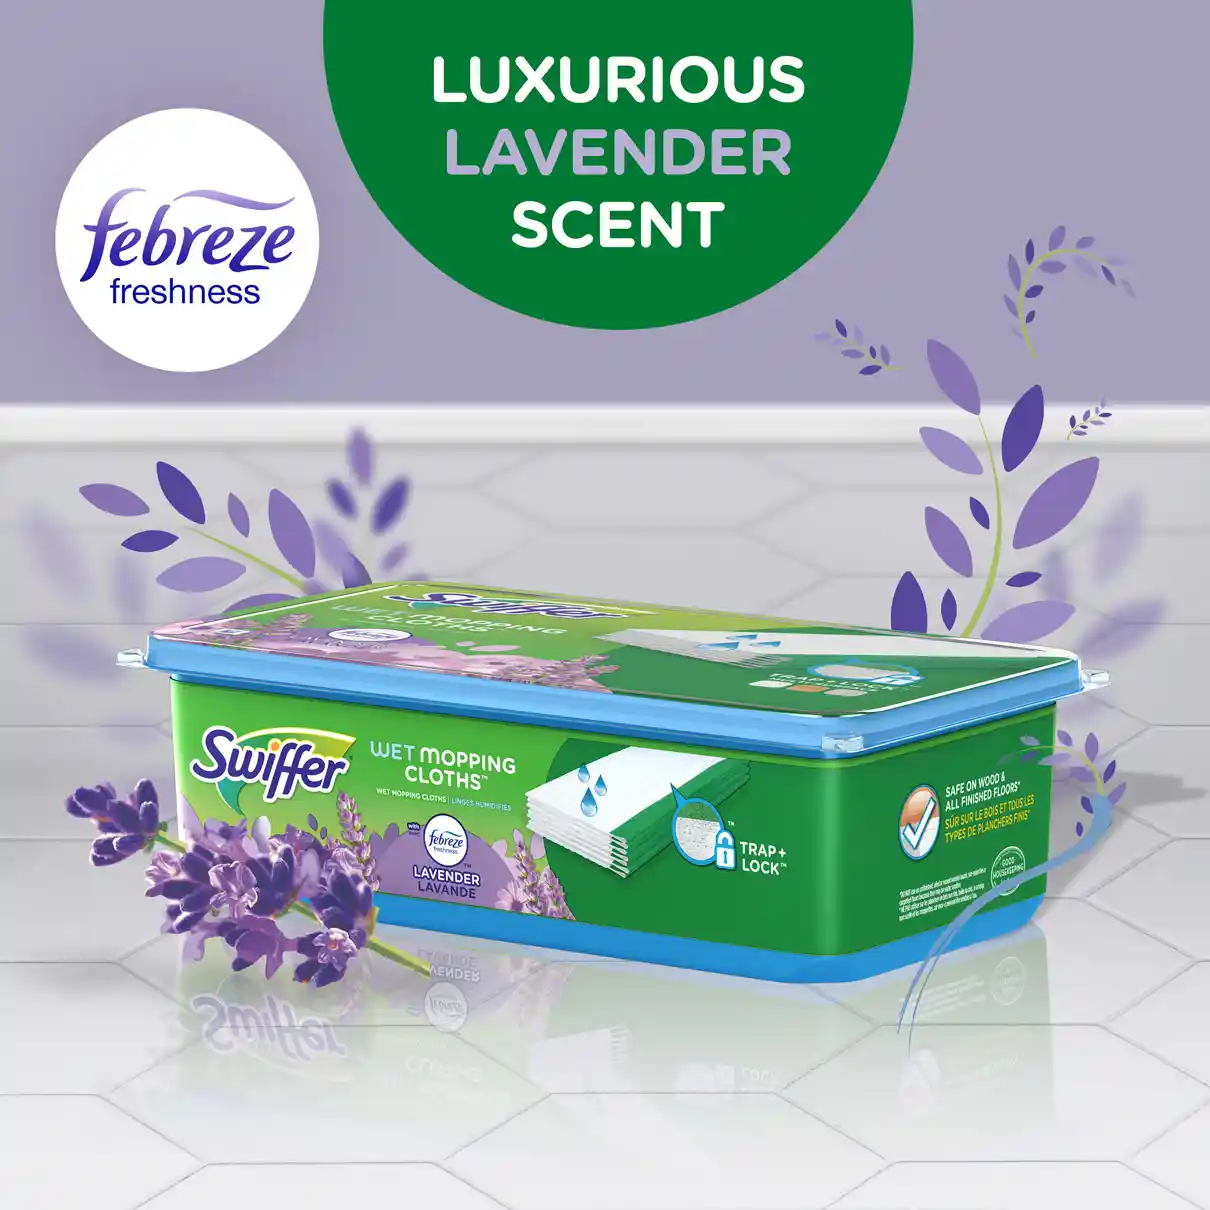 Swiffer Sweeper Lavender & Vanilla Wet Mopping Cloths